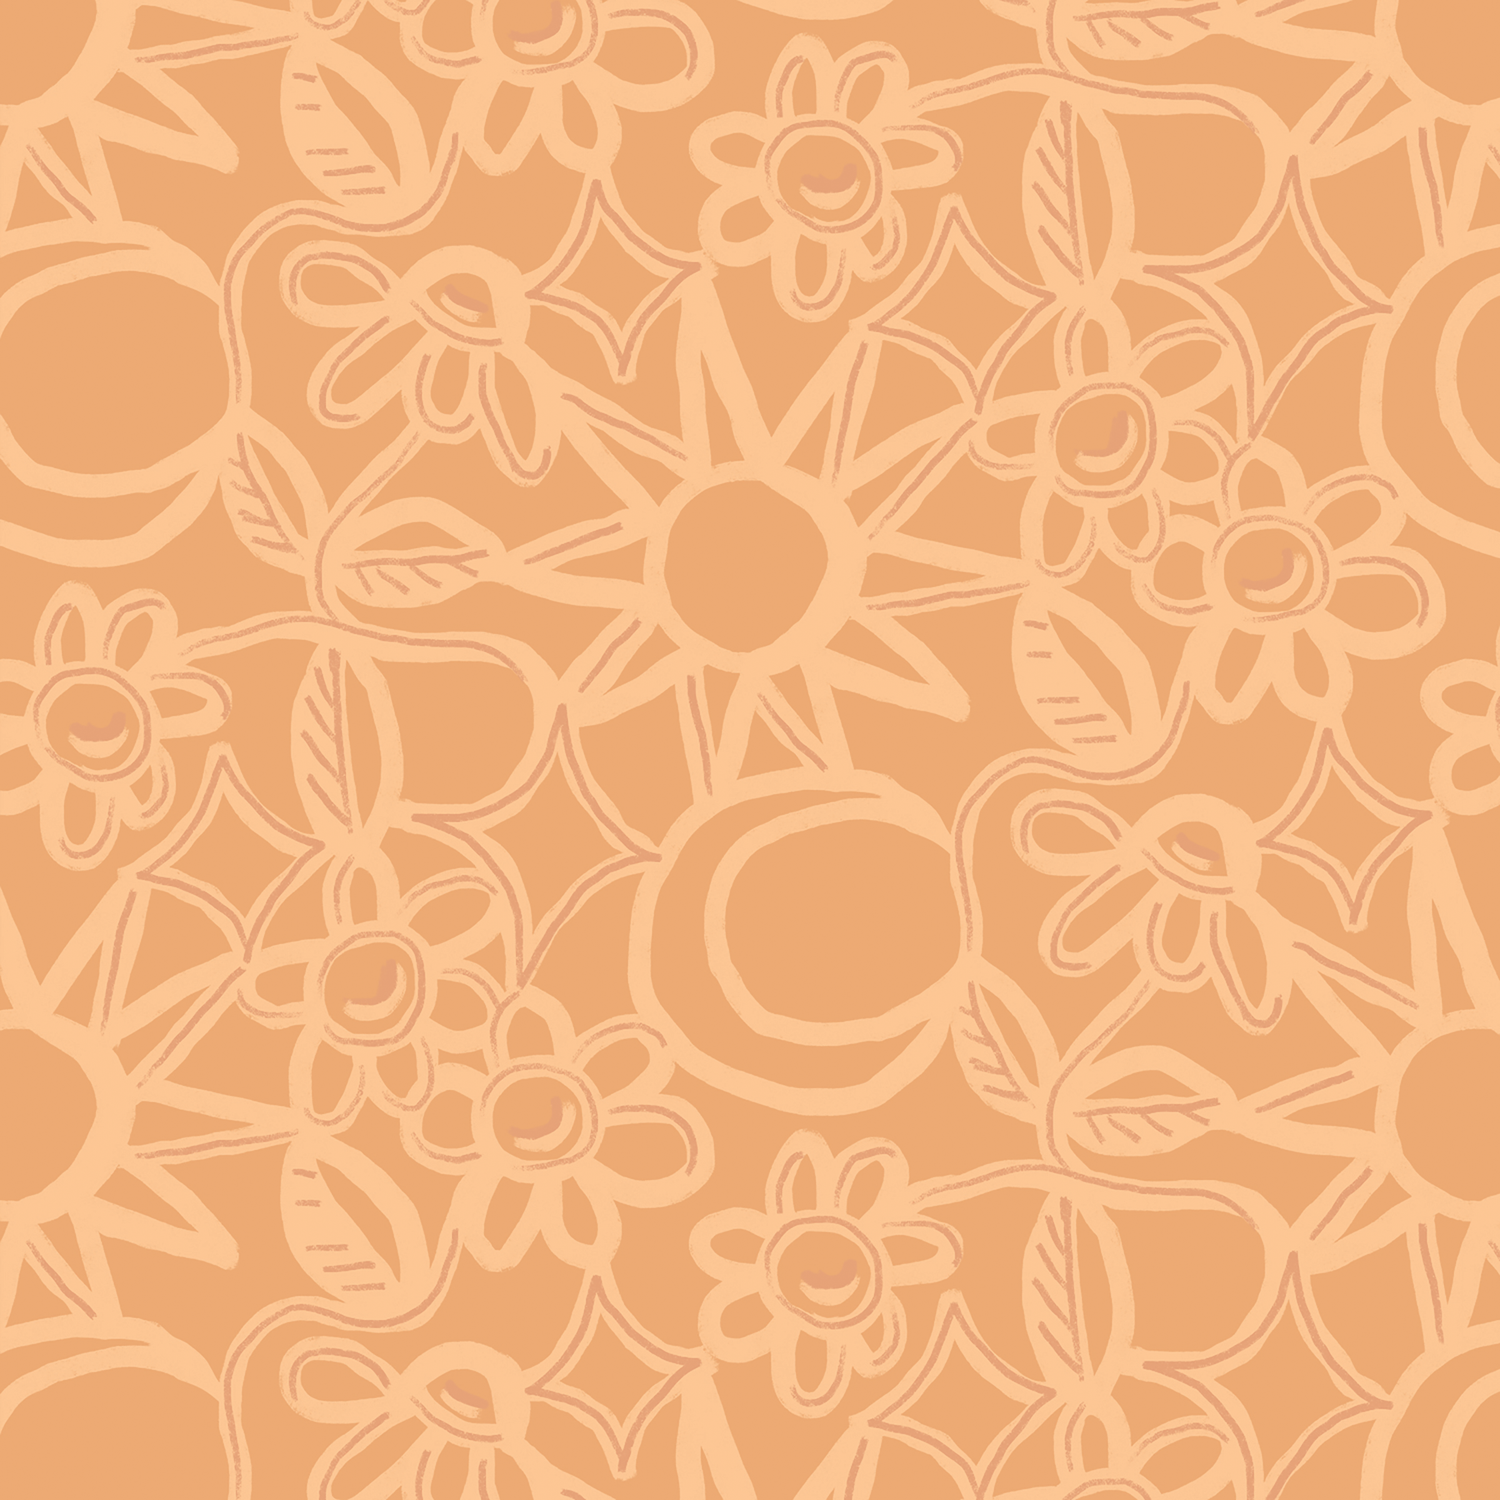 Cheetah Print Contact Paper - Colored with White Pattern, multiple options  — SAMANTHA SANTANA